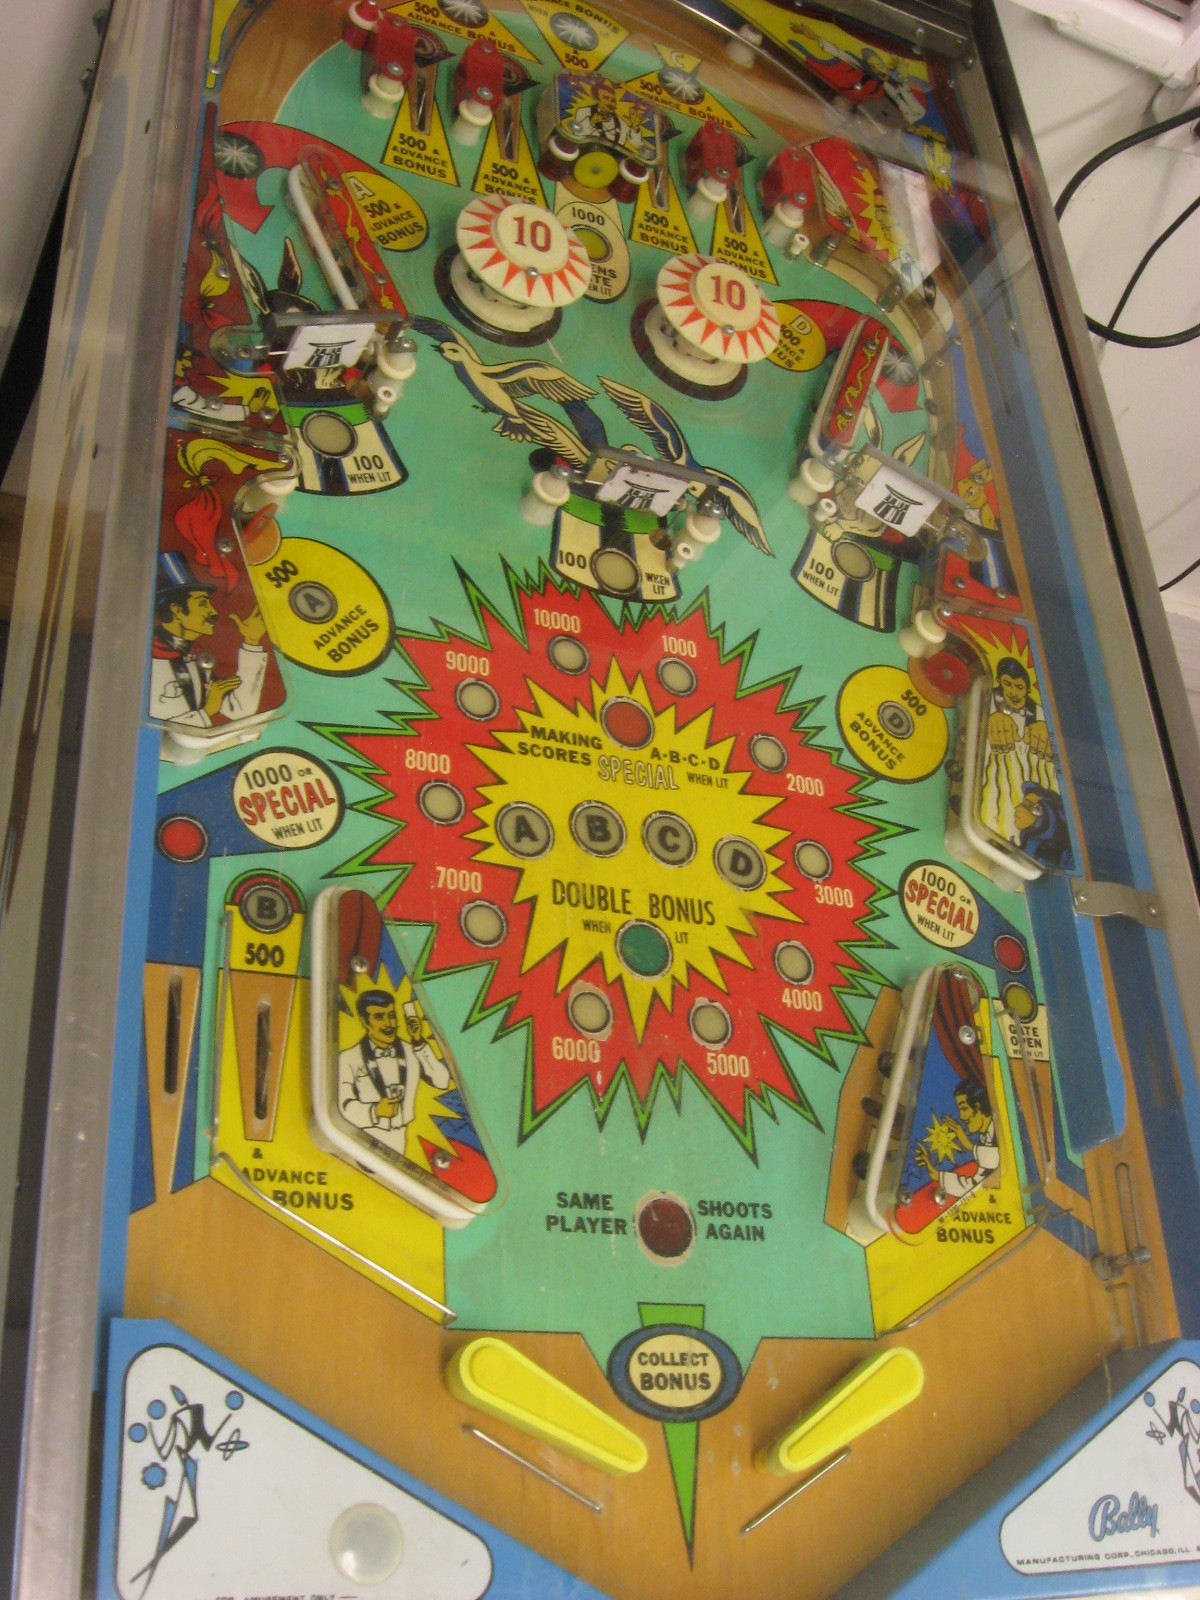 Photo of the playfield of a Hokus Pokus pinball machine at Buffalo’s Last Stand in Cope, Colorado